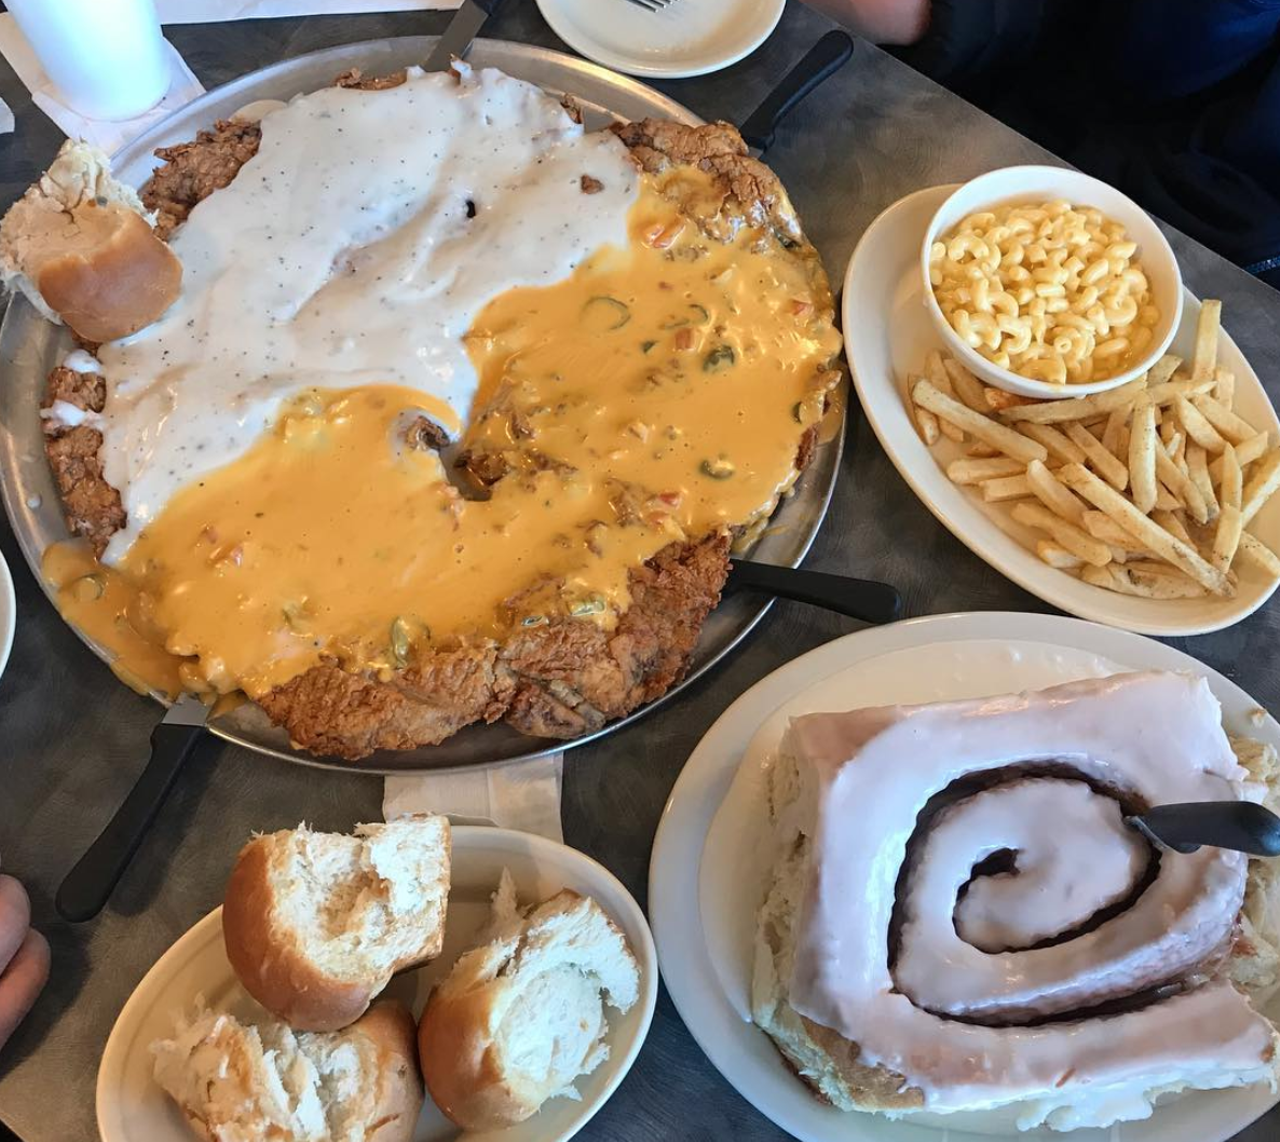 While Lulu’s doesn’t exactly offer an official “challenge,” it does serve up some Texas-sized portions that will definitely challenge you. From the 3.5-pound cinnamon roll to the chicken fried steak the size of a serving tray, these menu items will leave you breathing heavily.
Photo via Instagram / cphantraveler